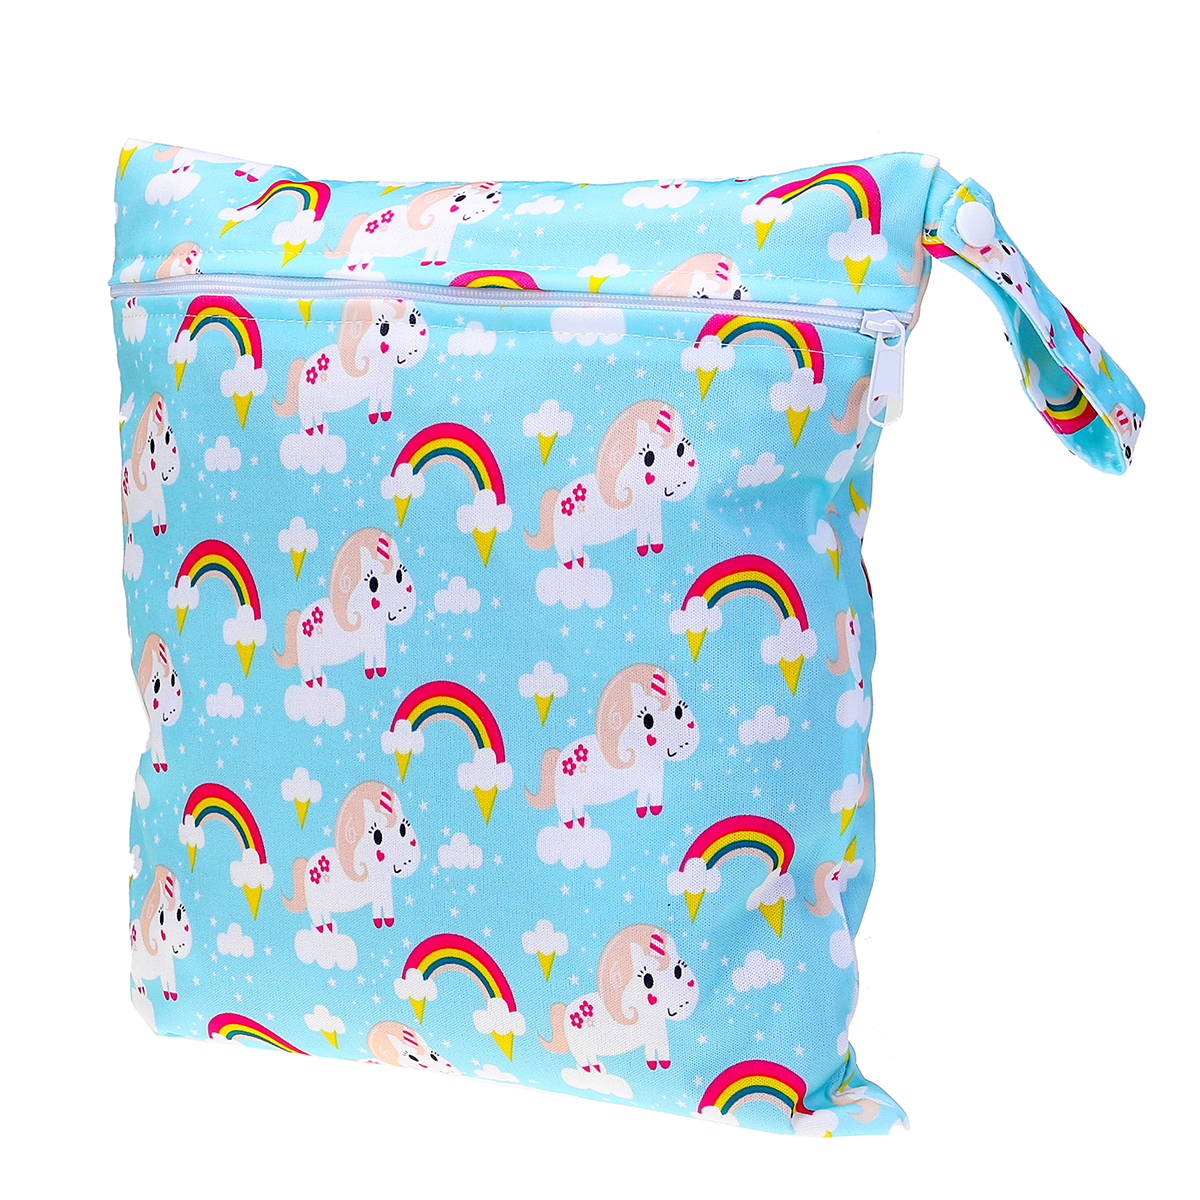 Reusable-Waterproof-Wet-Dry-Baby-Diapers-Bags-Portable-Travel-Baby-Nappy-Changing-Double-Pocket-Wetb-1647666-8